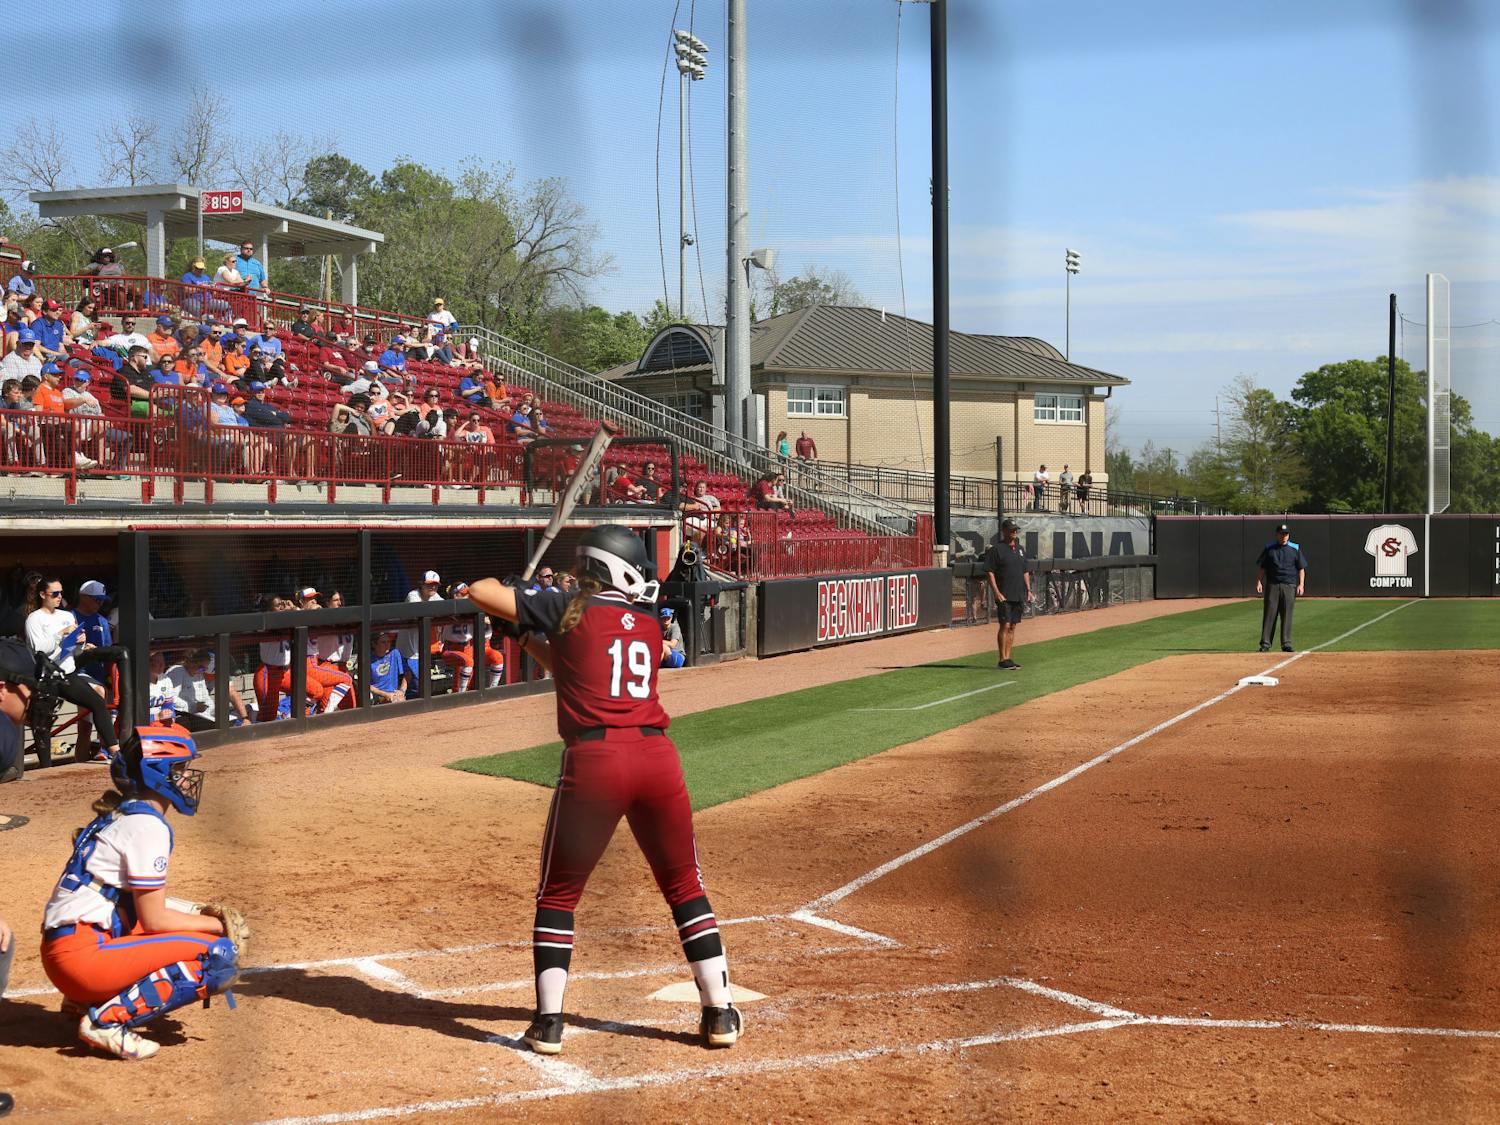 Junior catcher/utility player Jen Cummings awaits a pitch during South Carolina's game against the University of Florida on April 1, 2023. The Gamecocks won two of the three games in the series, landing its first SEC series win.